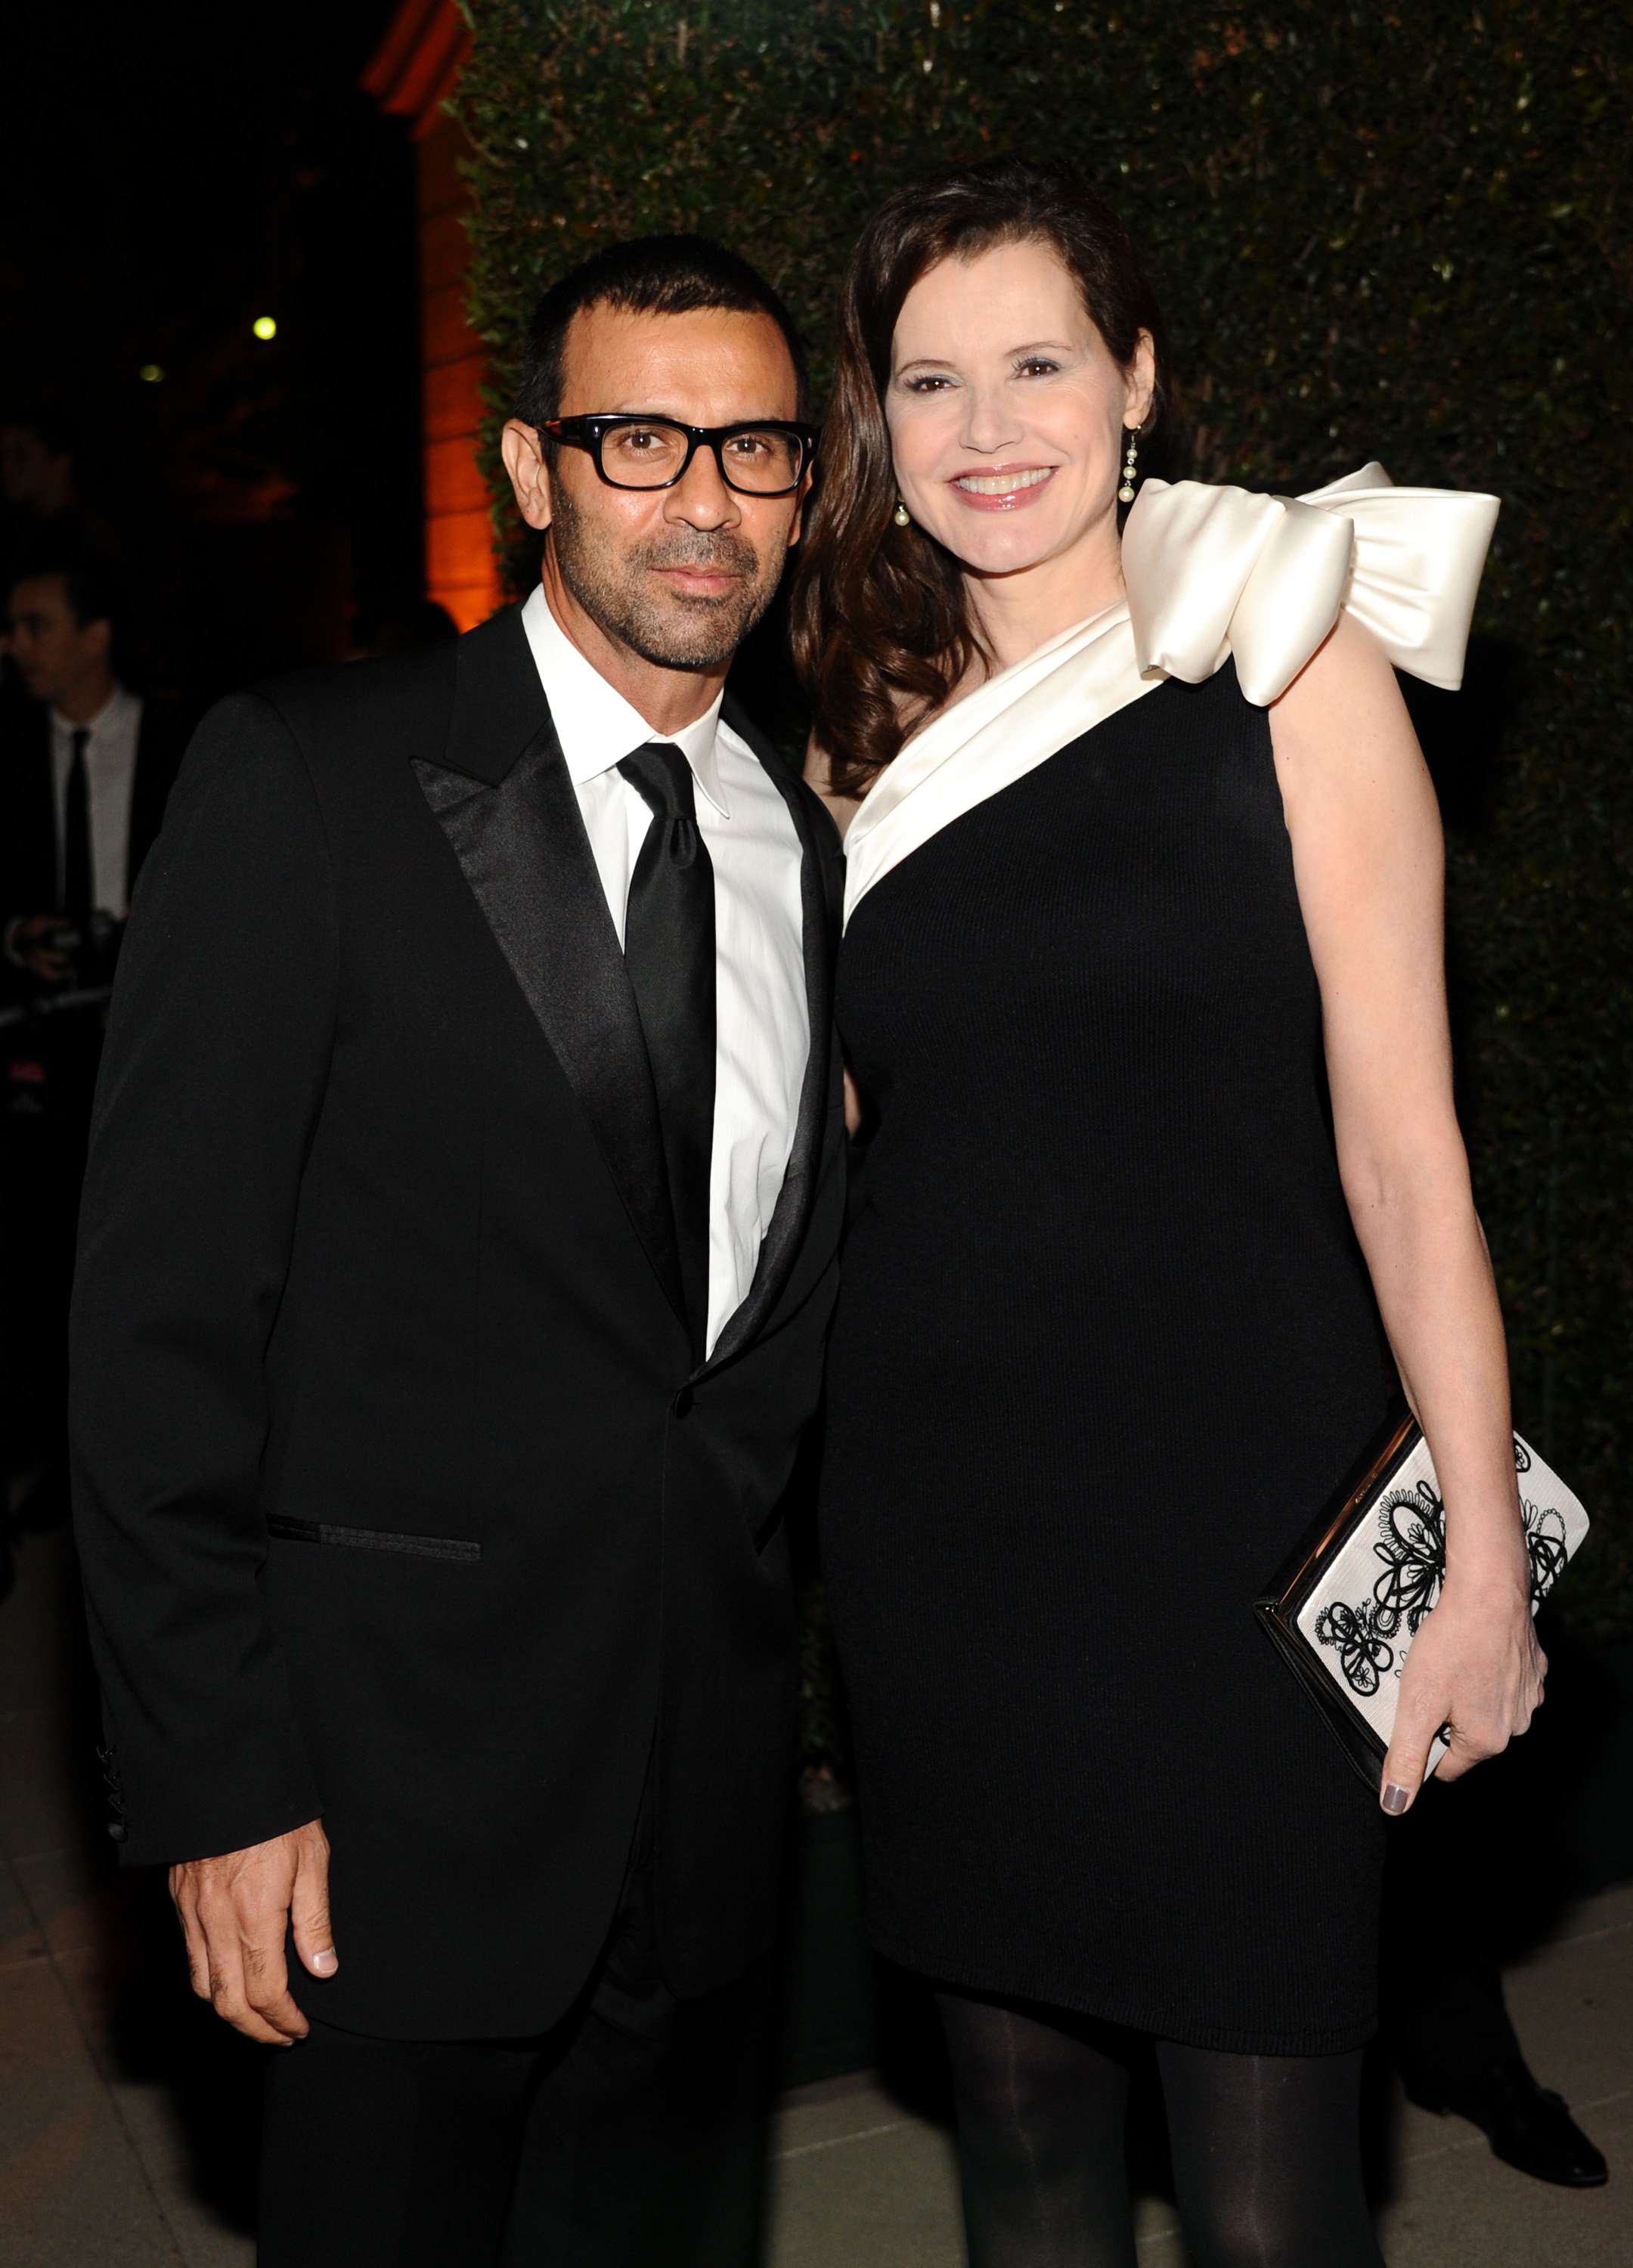 Geena Davis and Reza Jarrahy attending the Wallis Annenberg Center for the Performing Arts Inaugural Gala at the Wallis Annenberg Center for the Performing Arts on October 17, 2013 in Beverly Hills, California. / Source: Getty Images